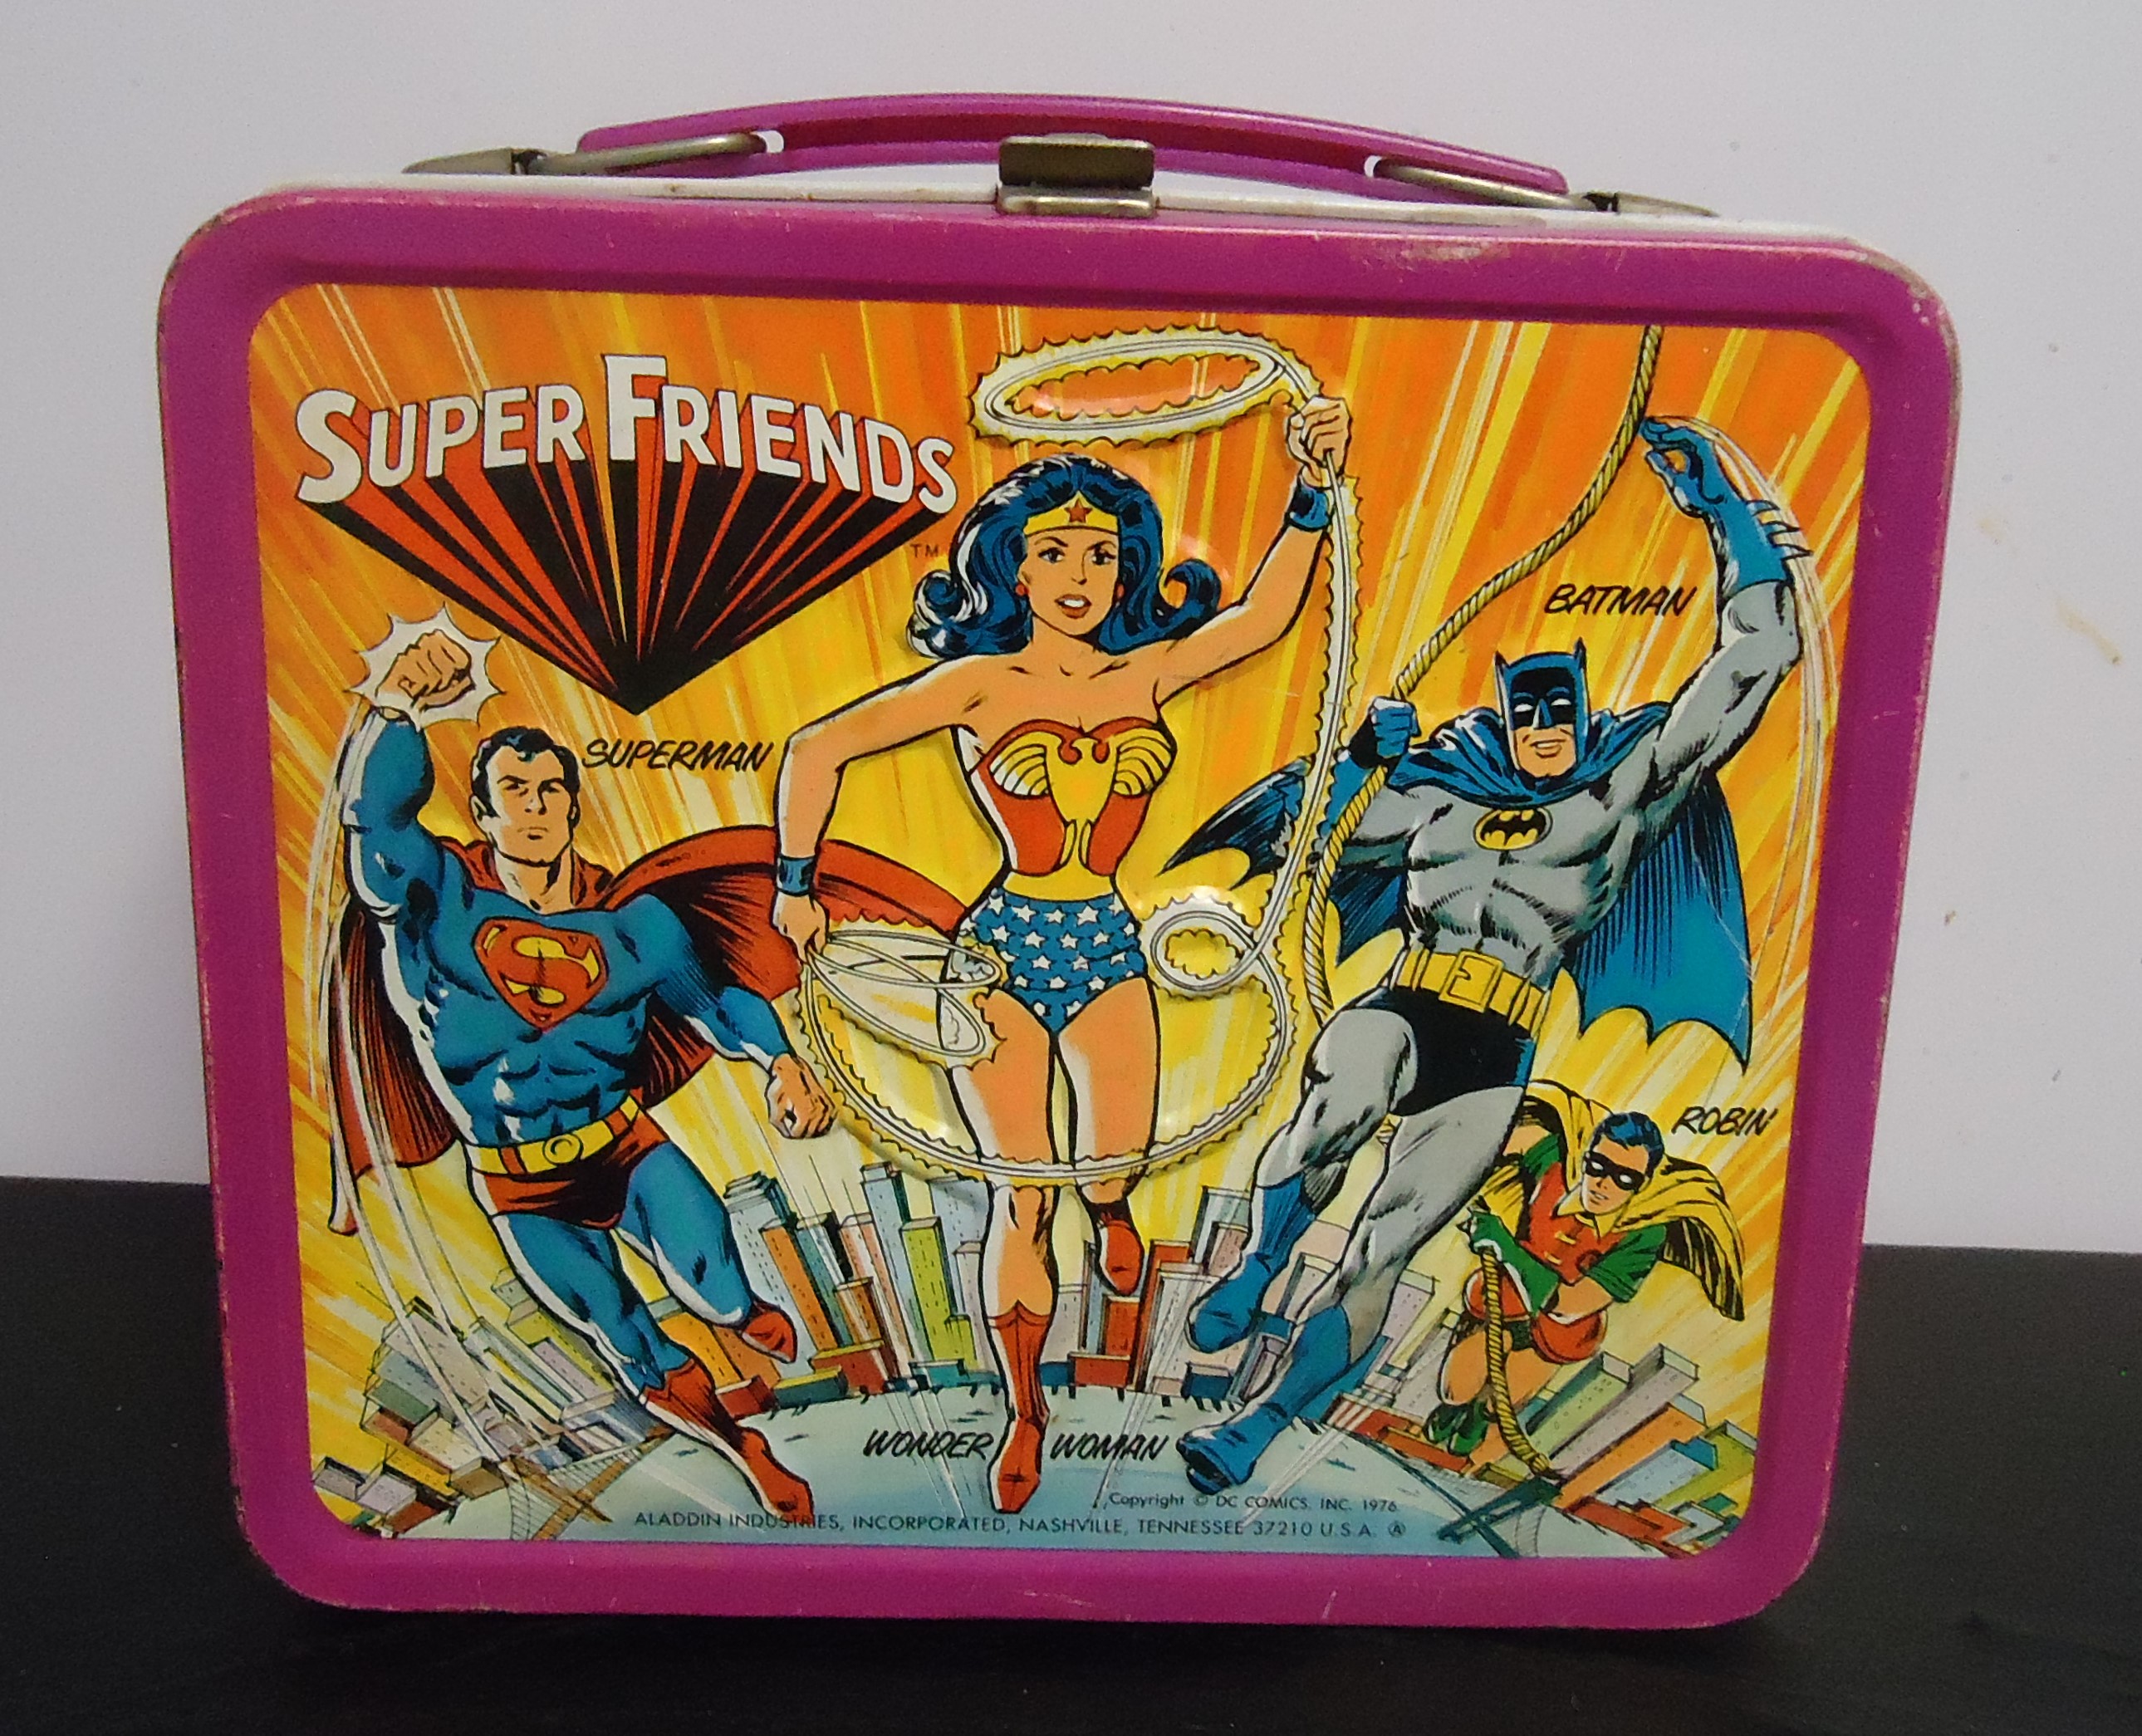 (21) "Super Friends" Metal Lunch Box
W/ Out Thermos
$38.00
